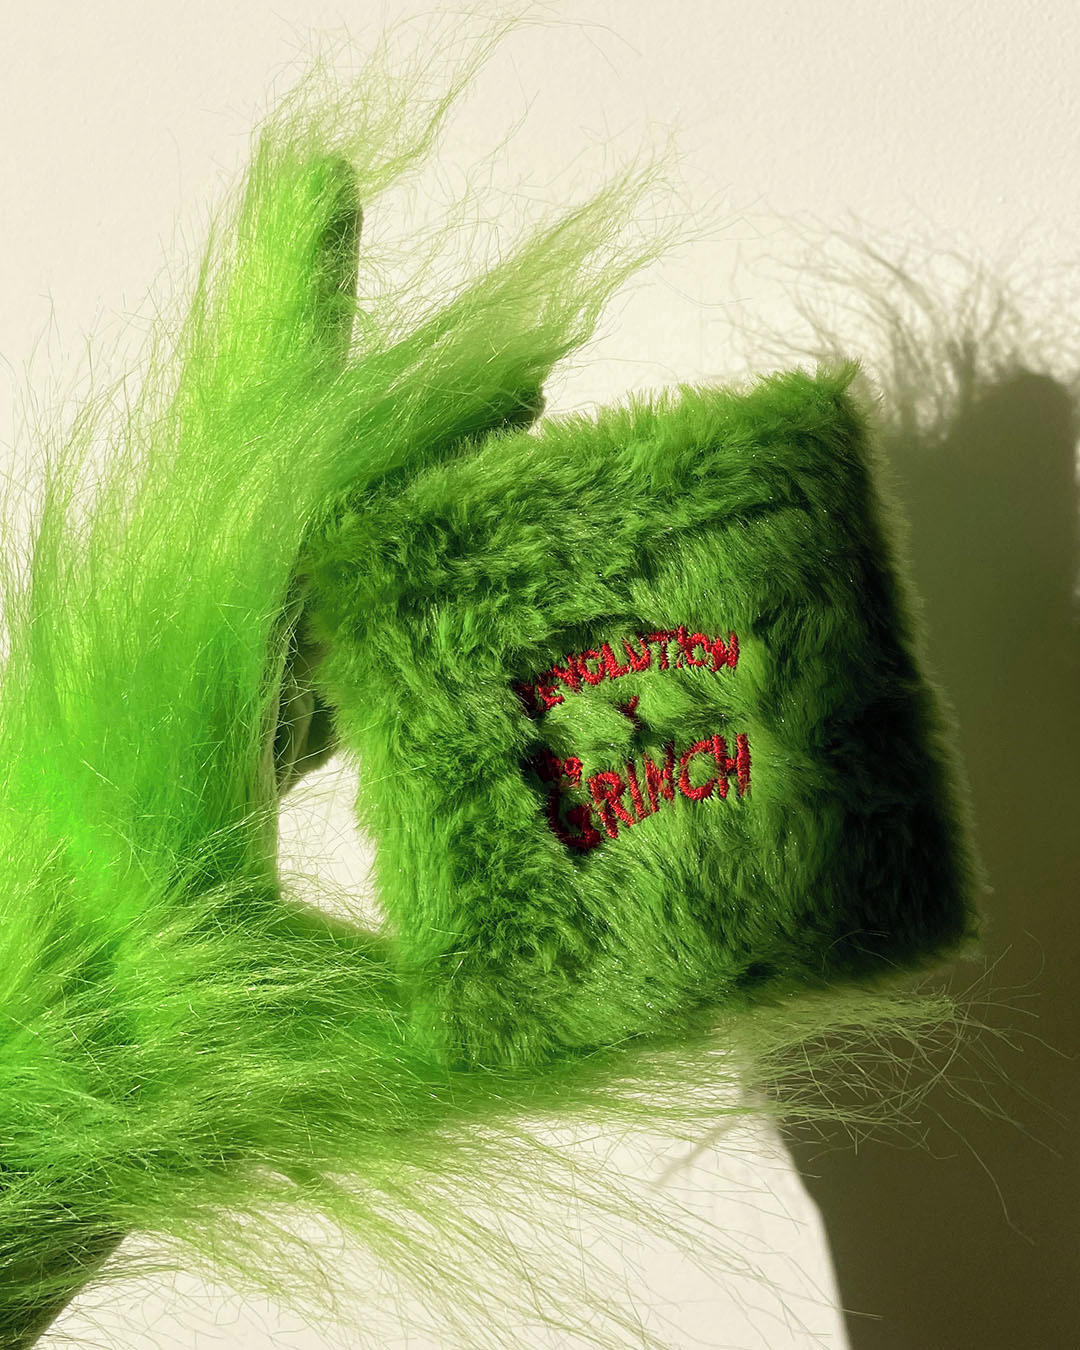 Revolution Makeup - Nothing says unhappy Holidays quite like this fluffy green collection